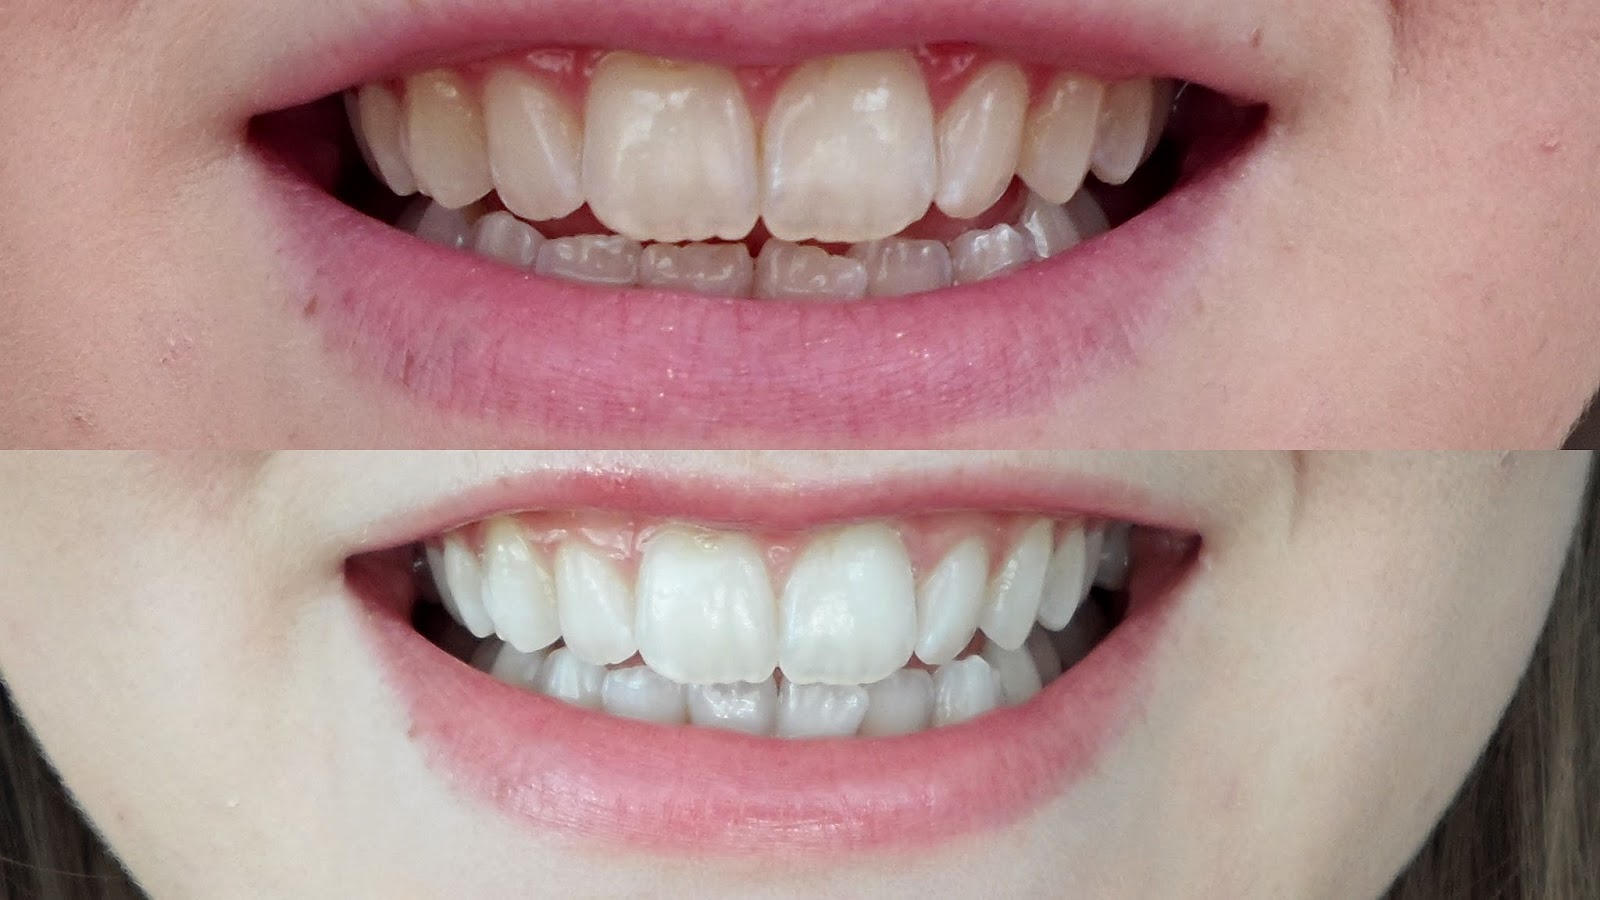 The gallery for --&gt; Teeth Whitening Strips Reviews